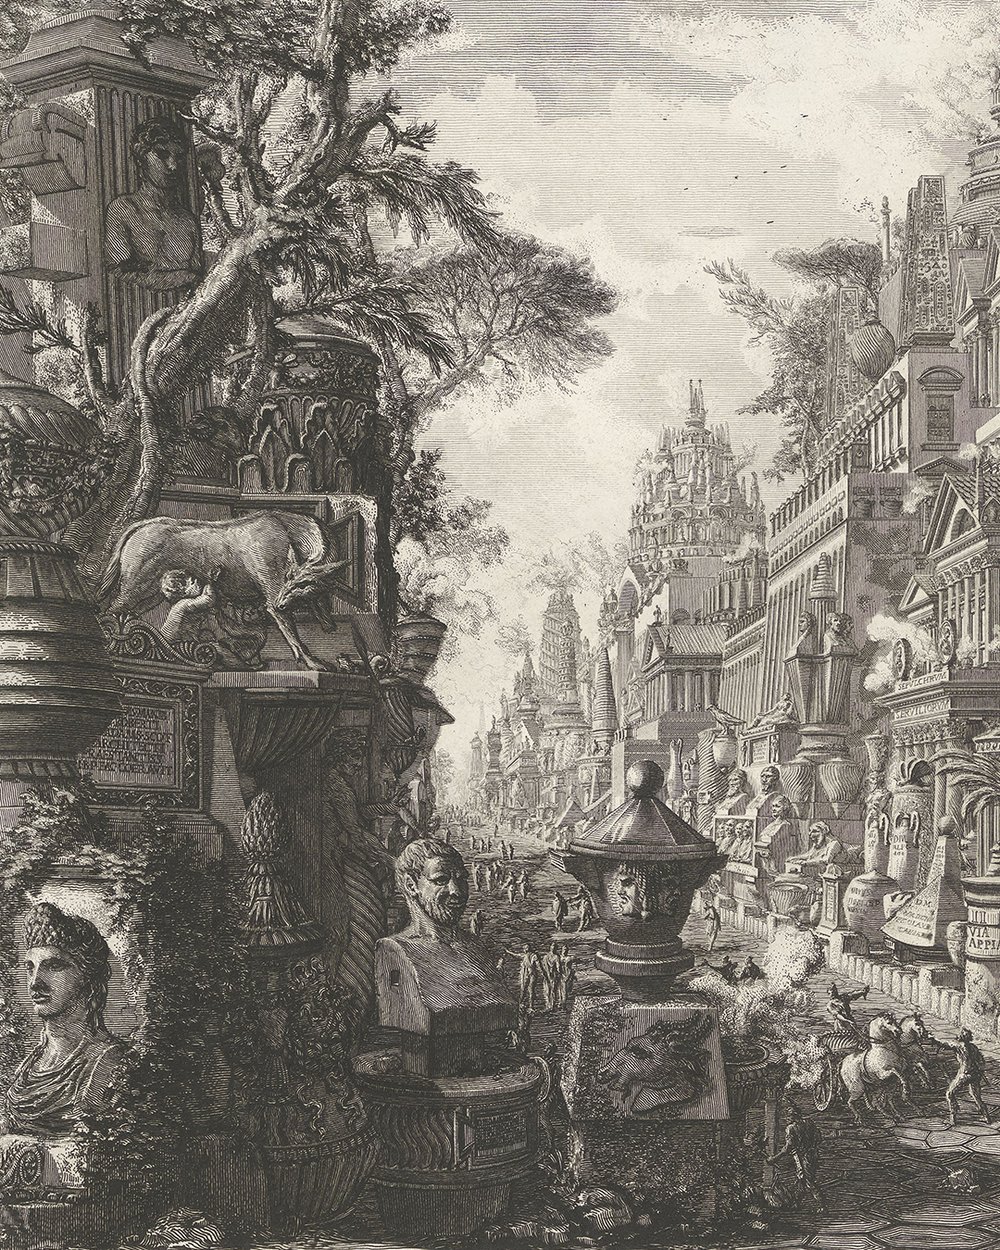 ''Frontispiece with a fantasy depiction of the Via Appia Antica'' (1756 - 1757)